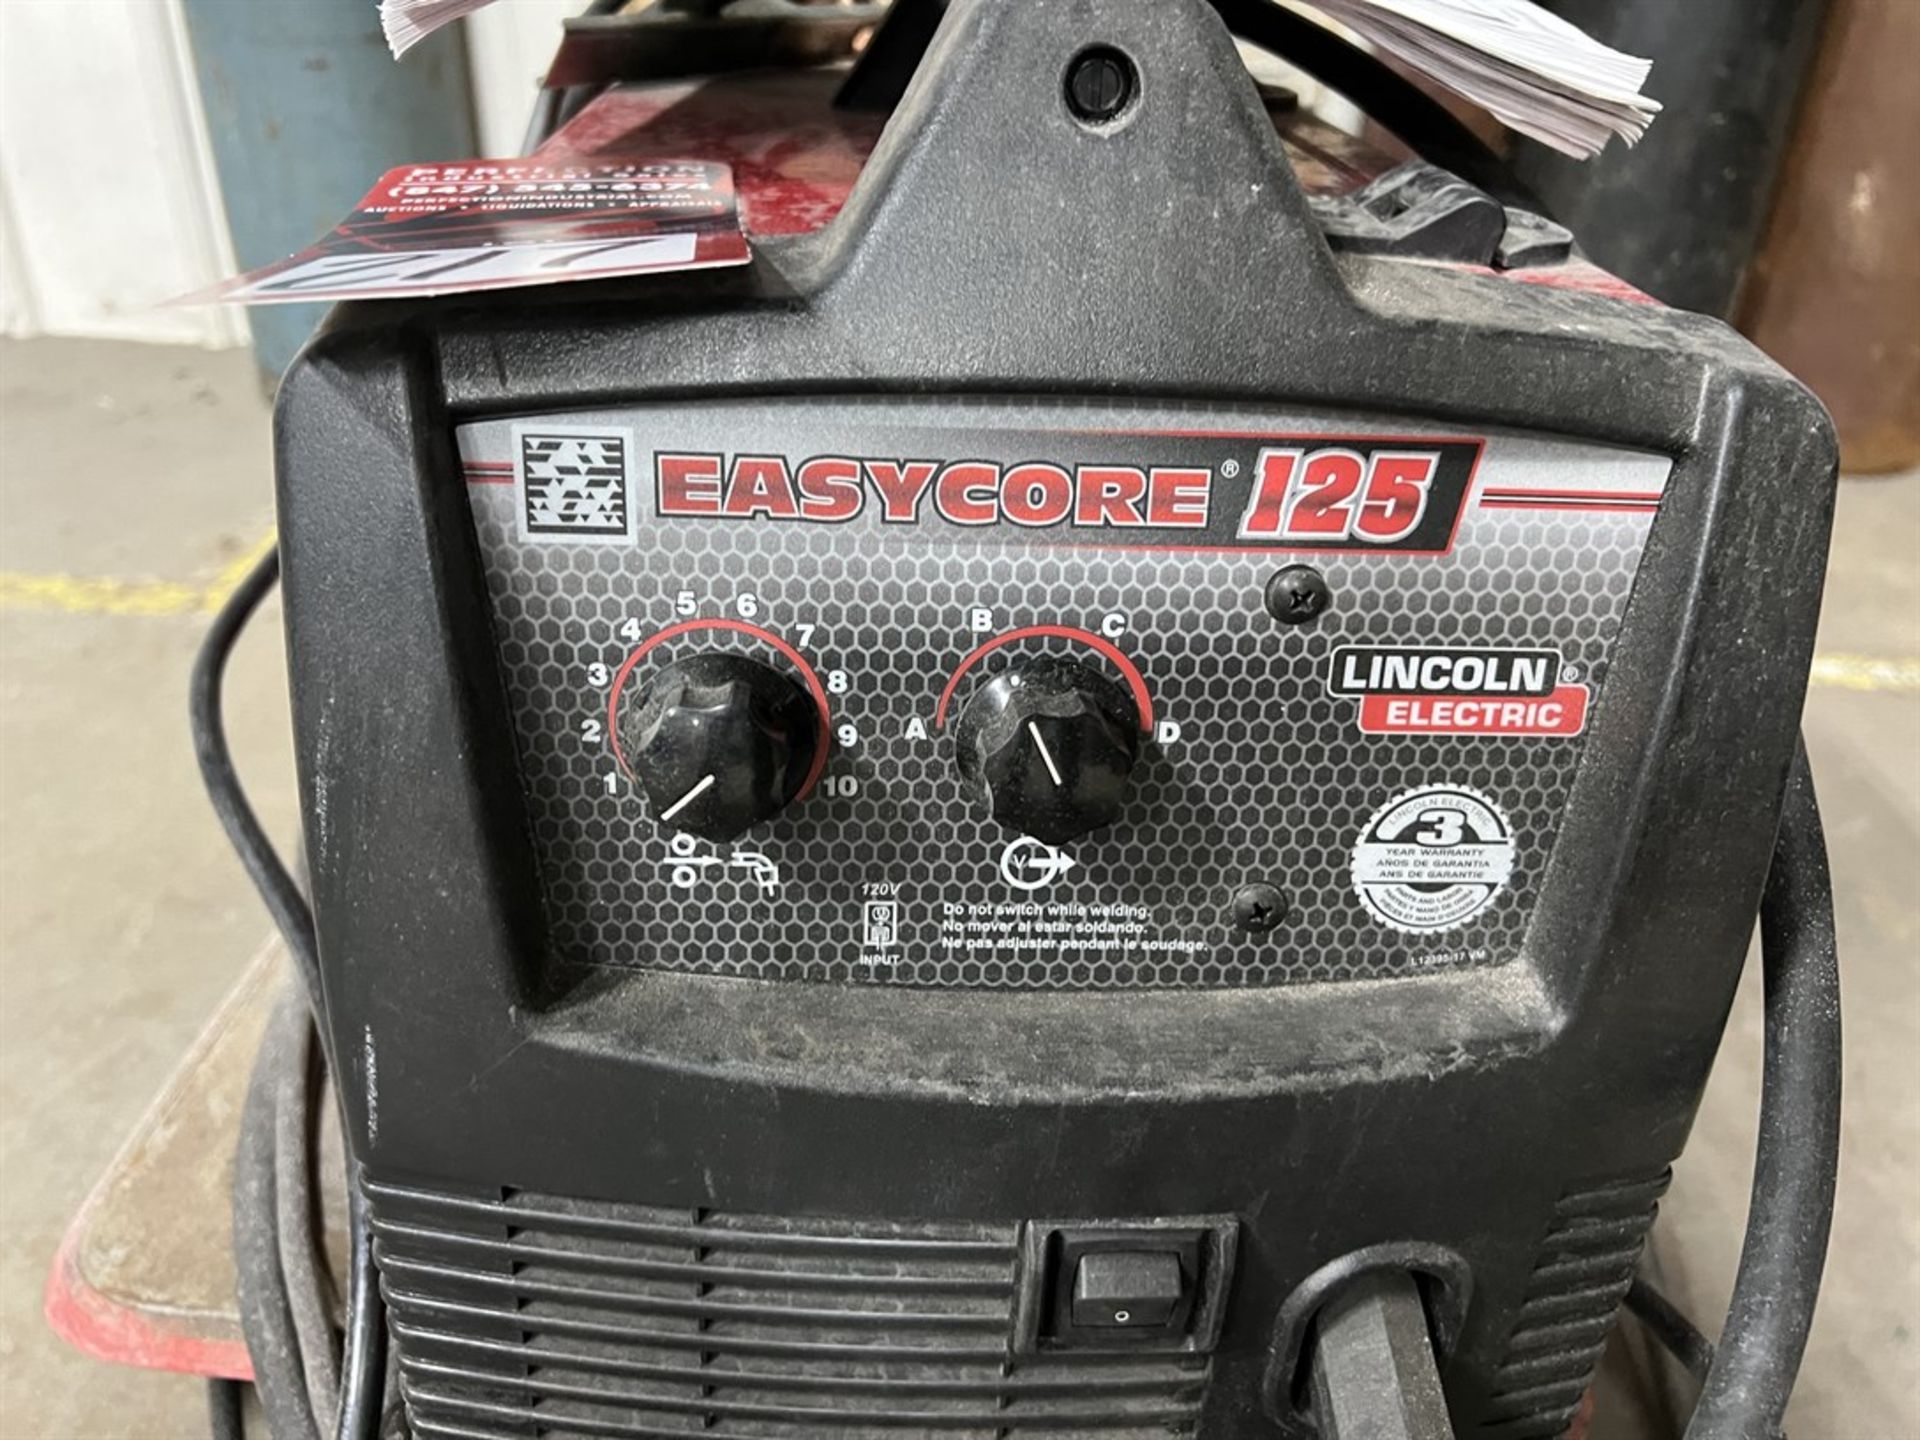 LINCOLN Easycore 125 Wire Feeder Welder, s/n M3140908057 - Image 3 of 4